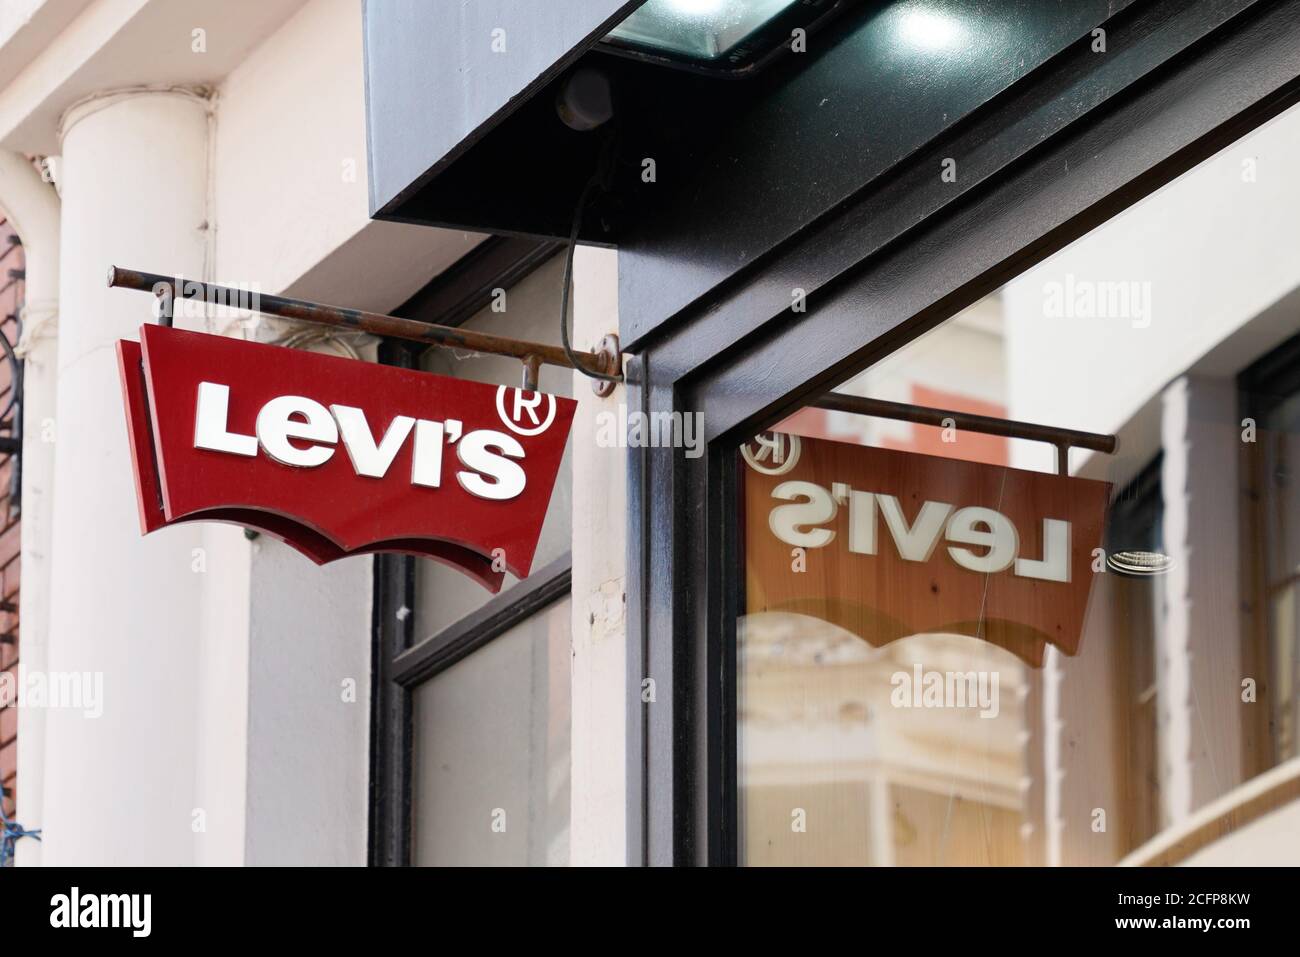 Bordeaux , Aquitaine / France - 09 01 2020 : Levi's logo red sign and text  front of Jeans levis store of clothing fashion levi strauss retail shop wit  Stock Photo - Alamy